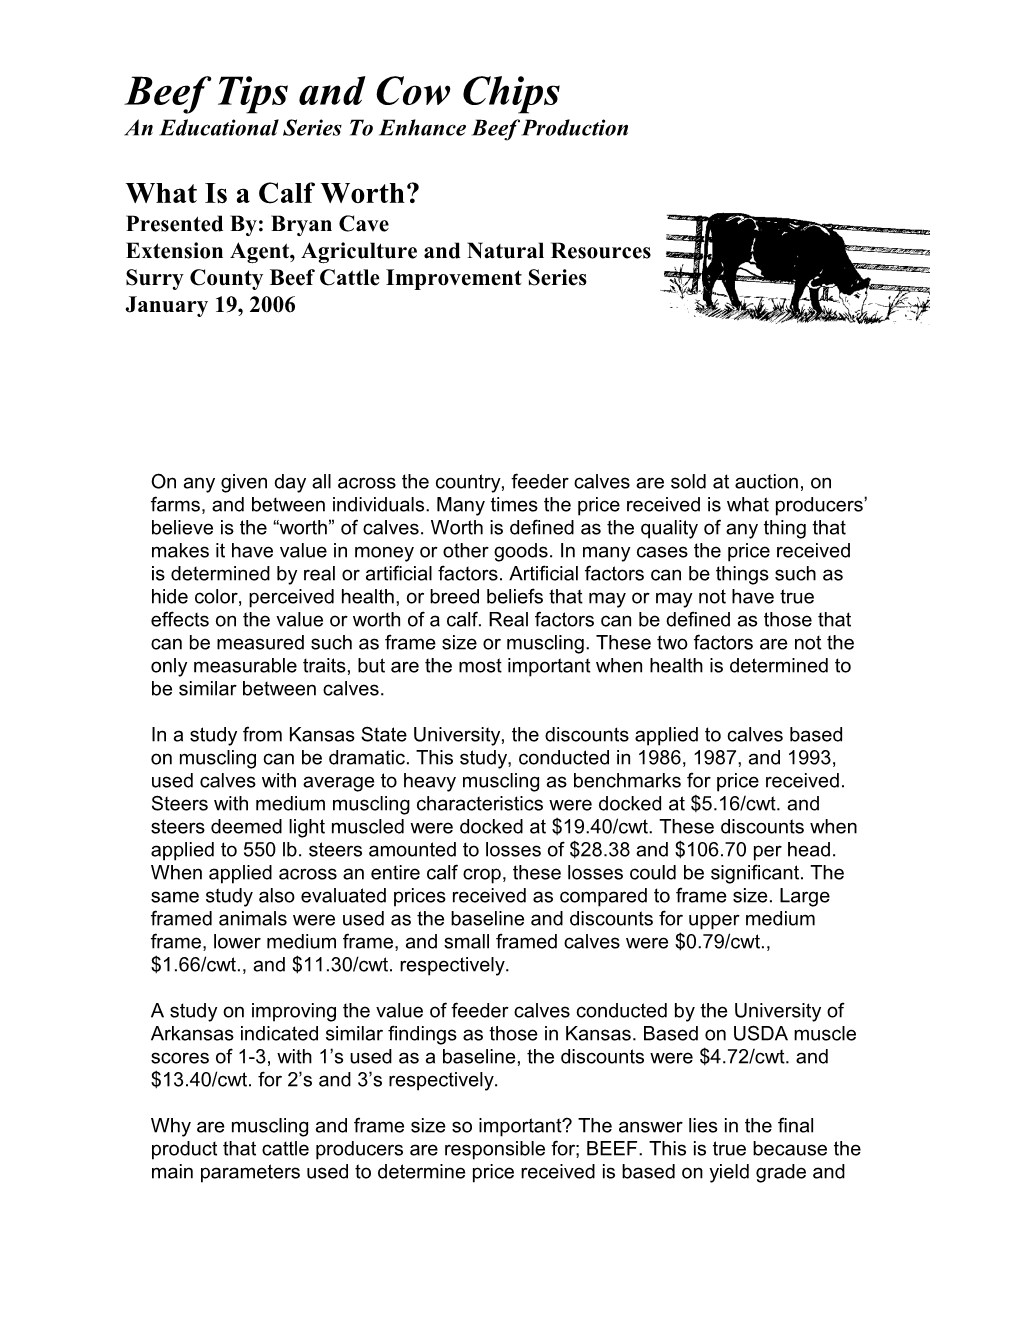 What Is a Calf Worth